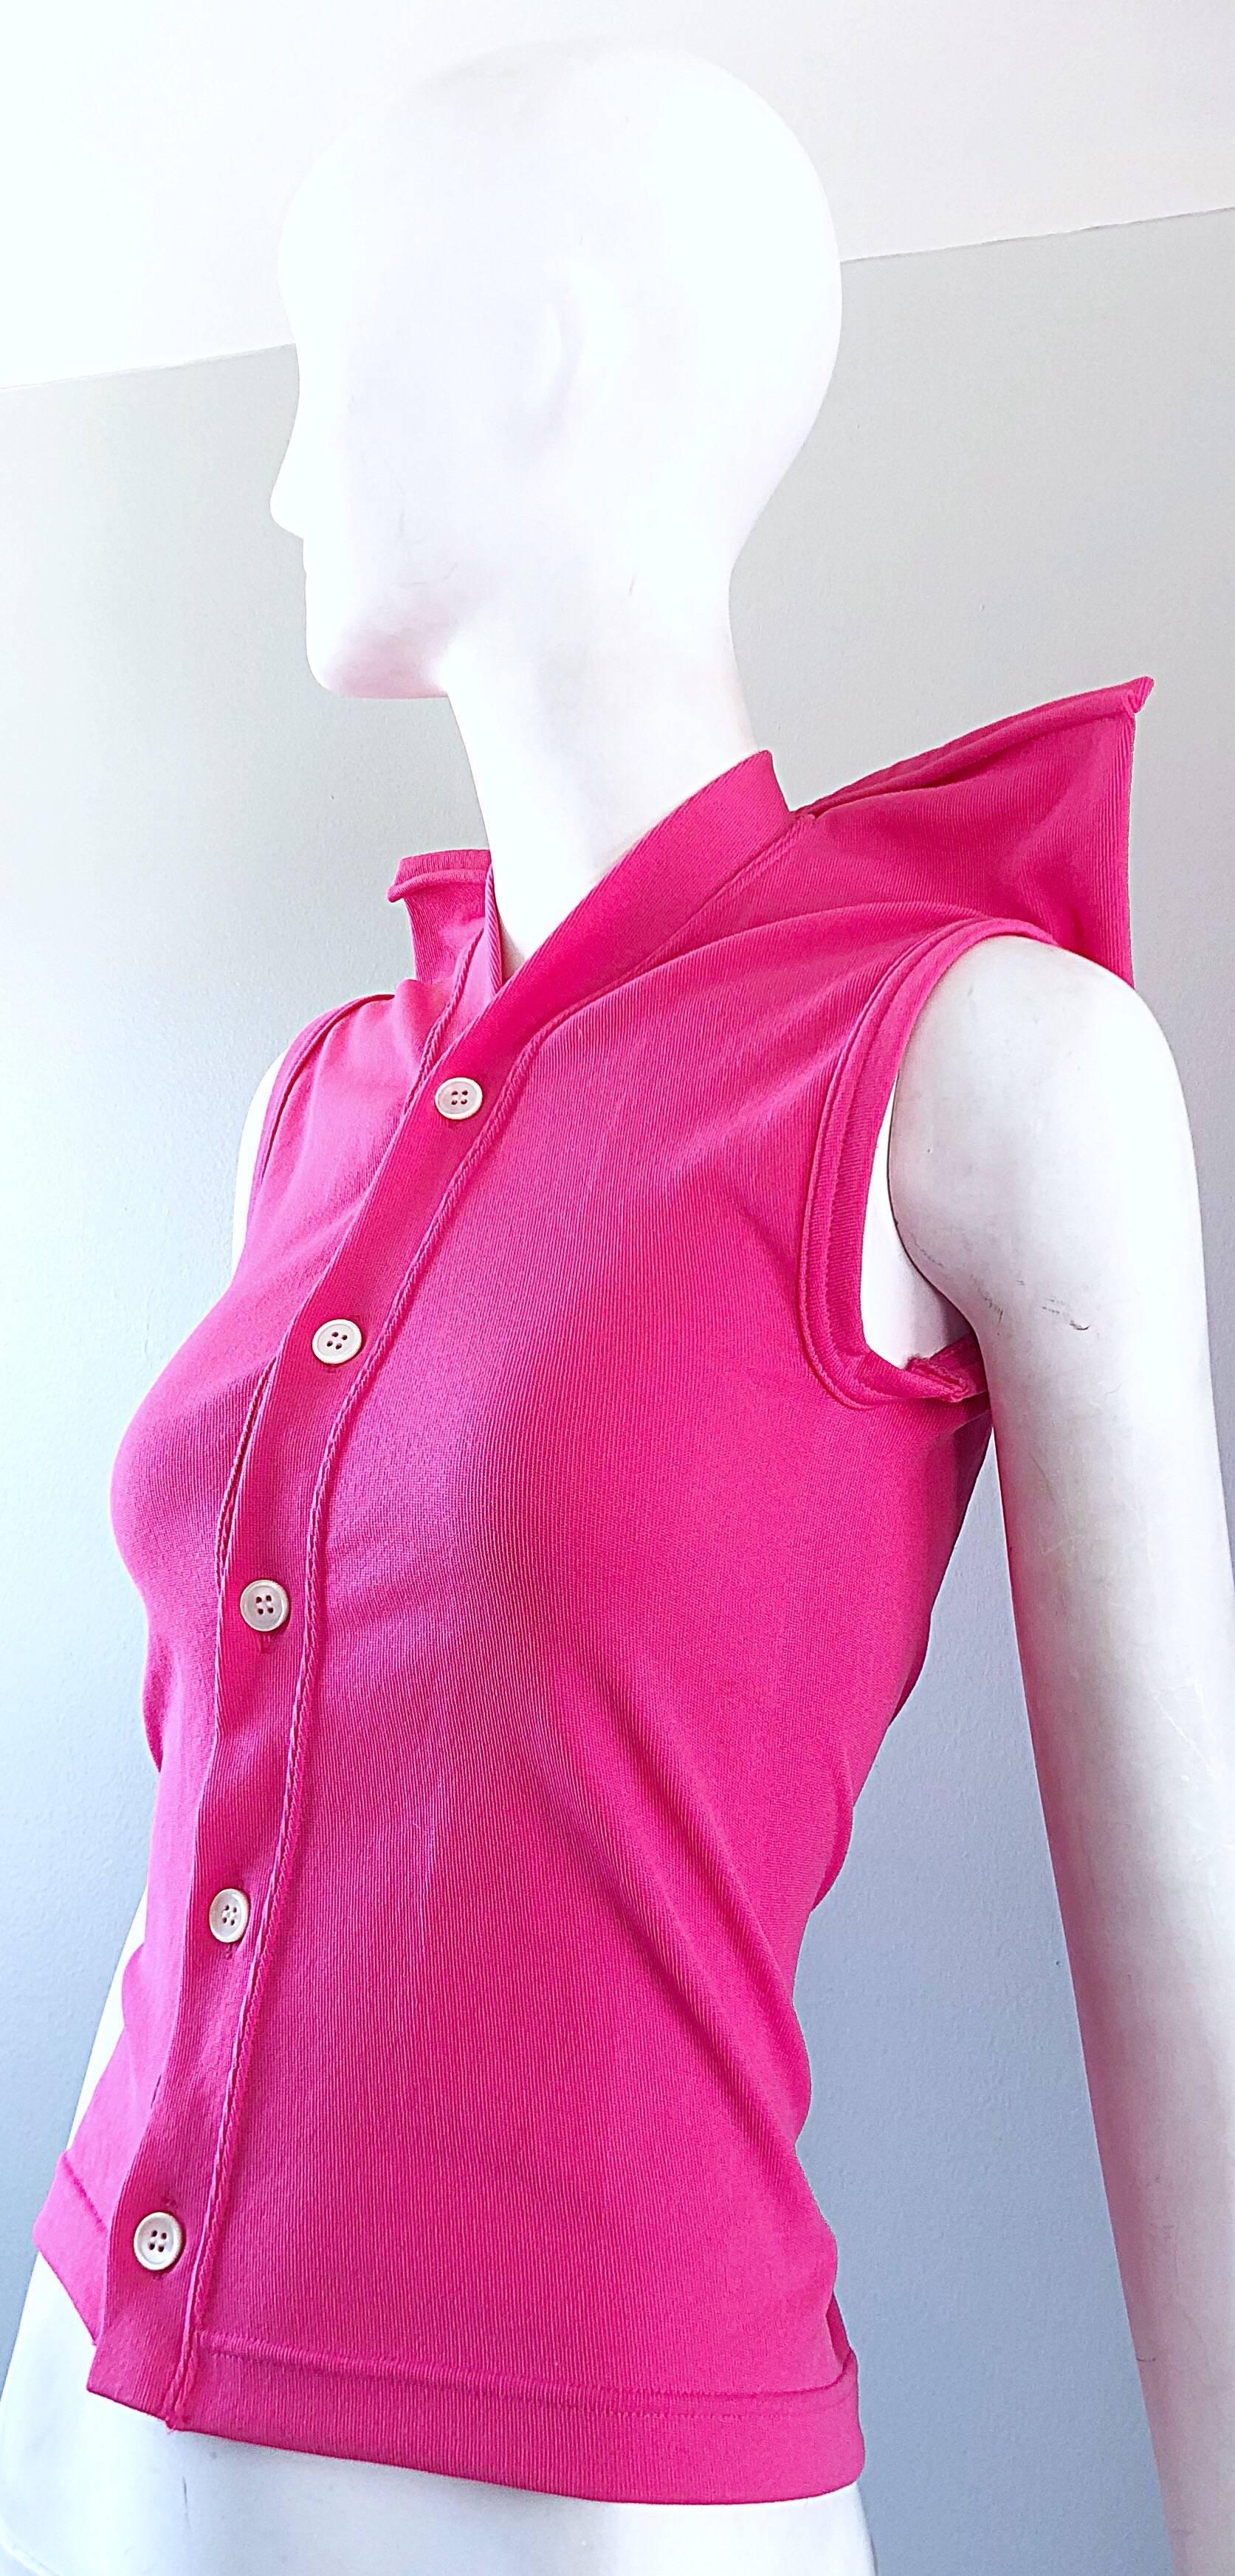 Rare Vintage Comme des Garcons 1990s Hot Pink Avant Garde Futuristic Top Blouse  In Excellent Condition For Sale In San Diego, CA